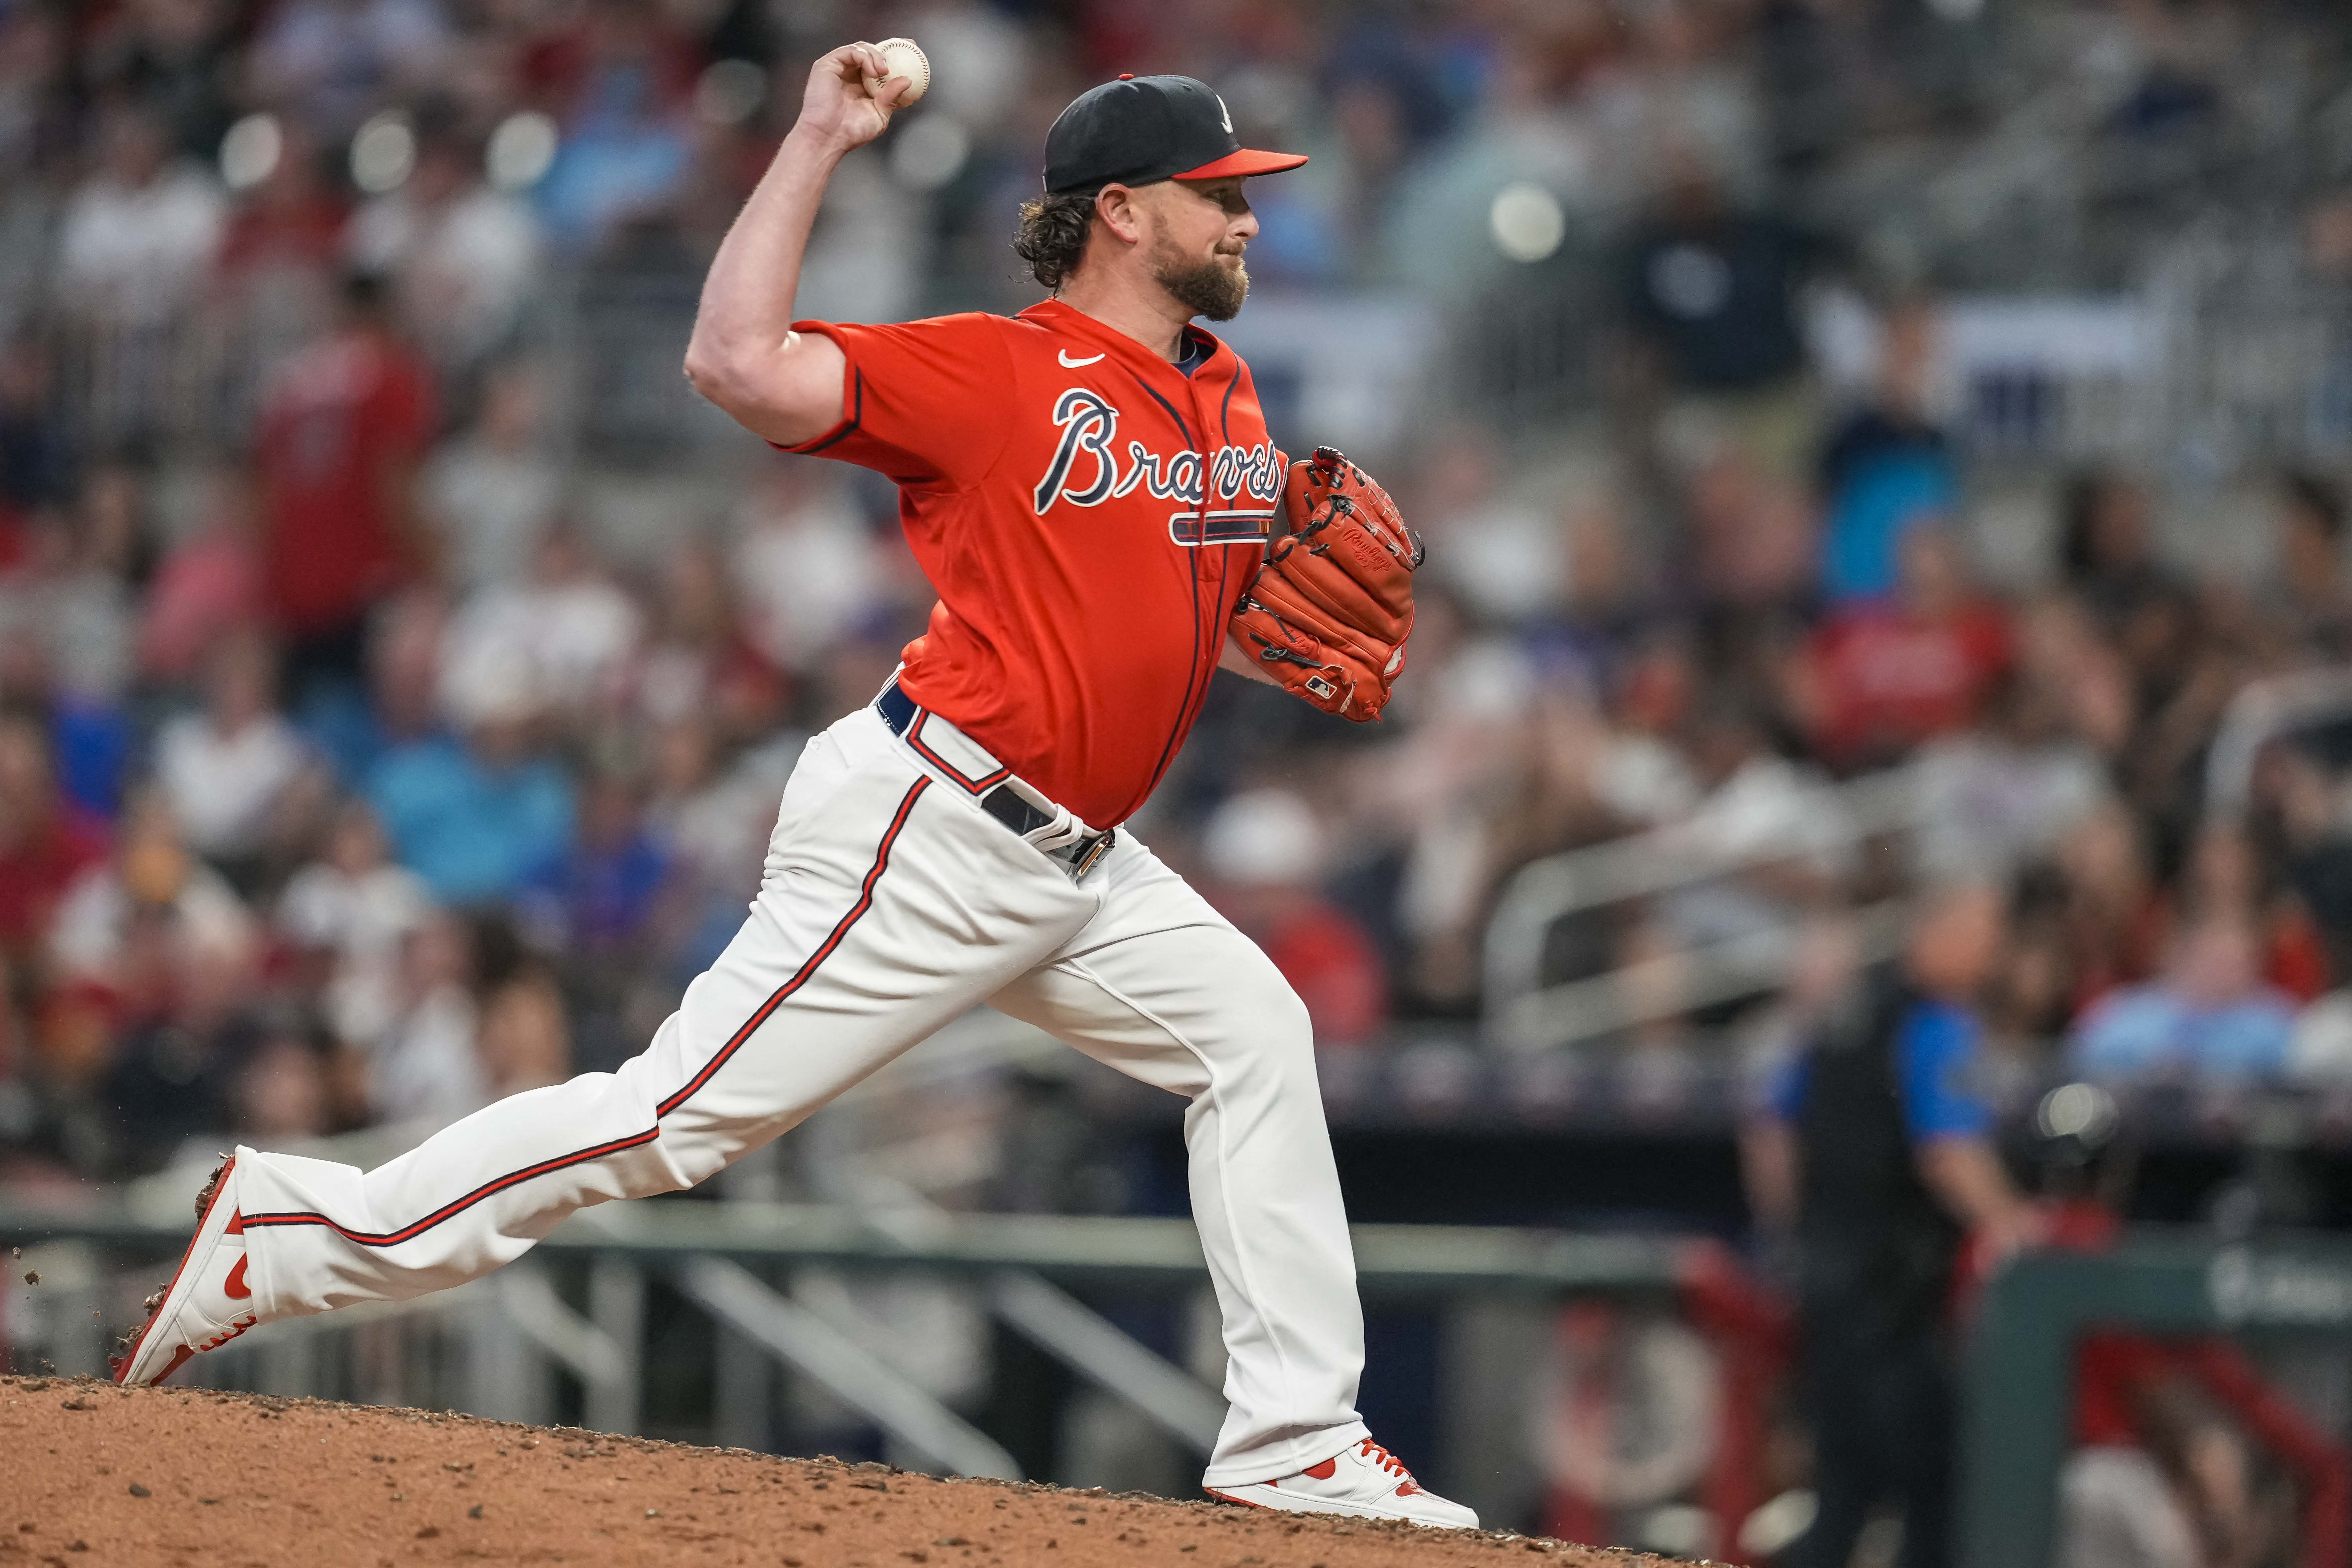 Wright, d'Arnaud lead Braves to sweep Marlins, reach NLCS - WAKA 8